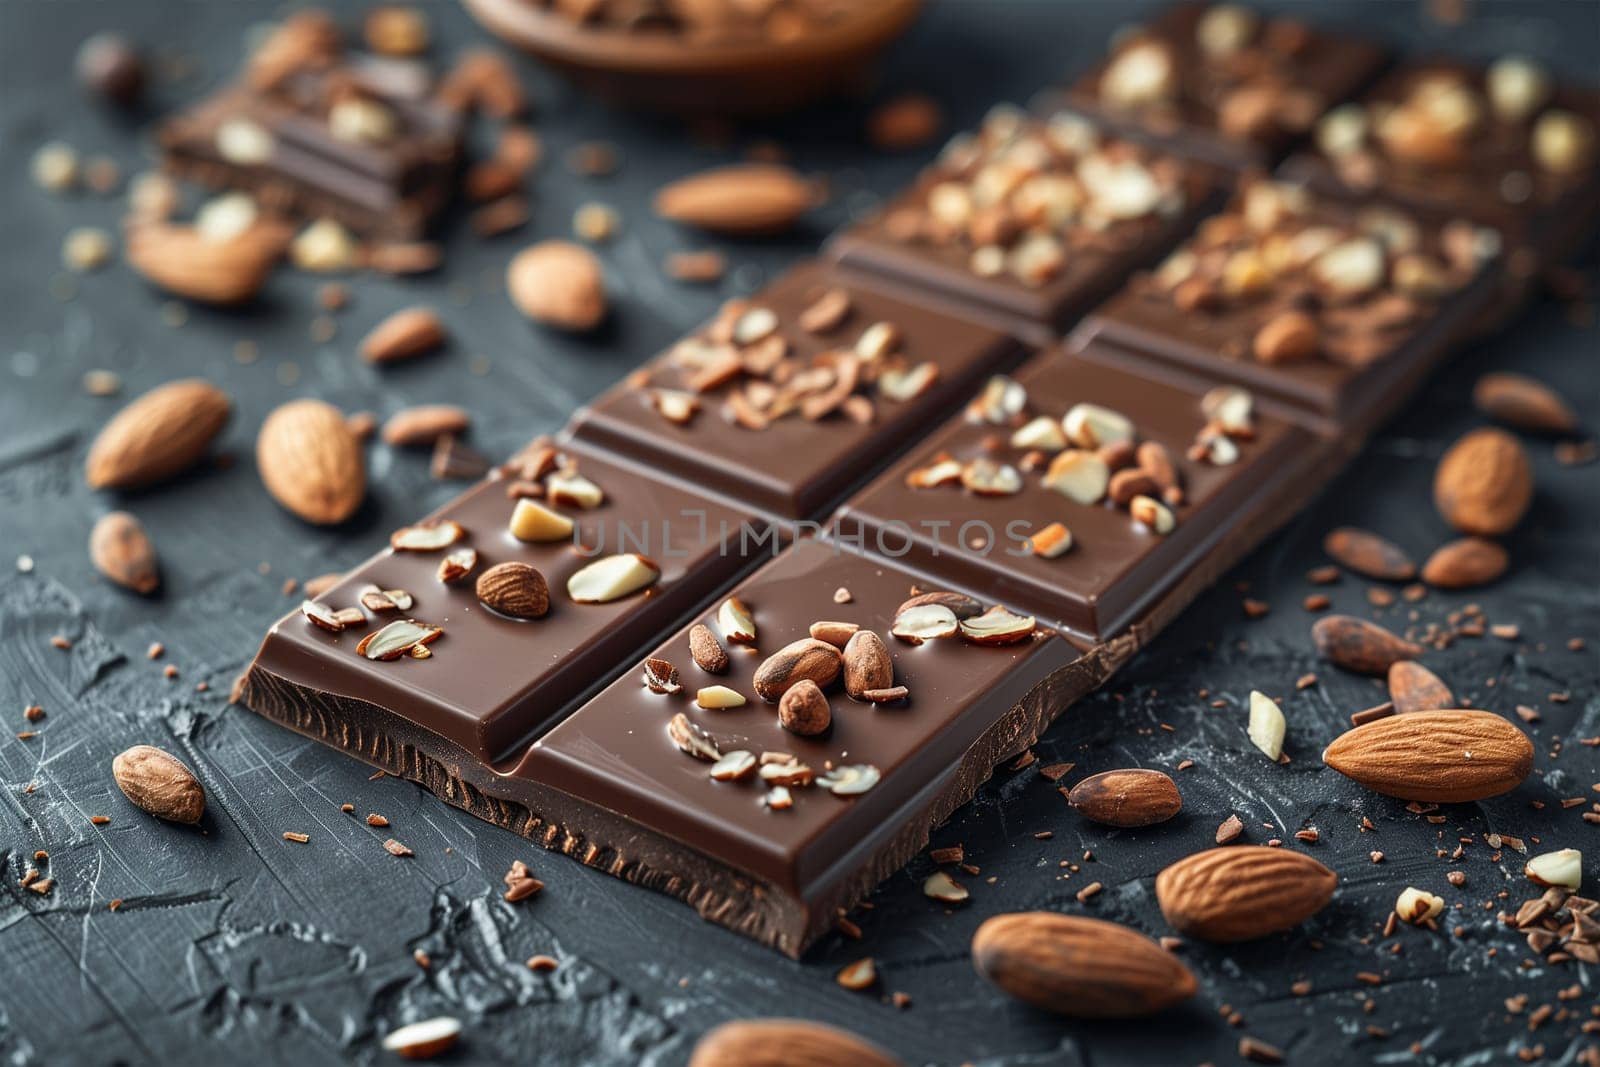 Close Up of Chocolate Bar With Almonds by Sd28DimoN_1976